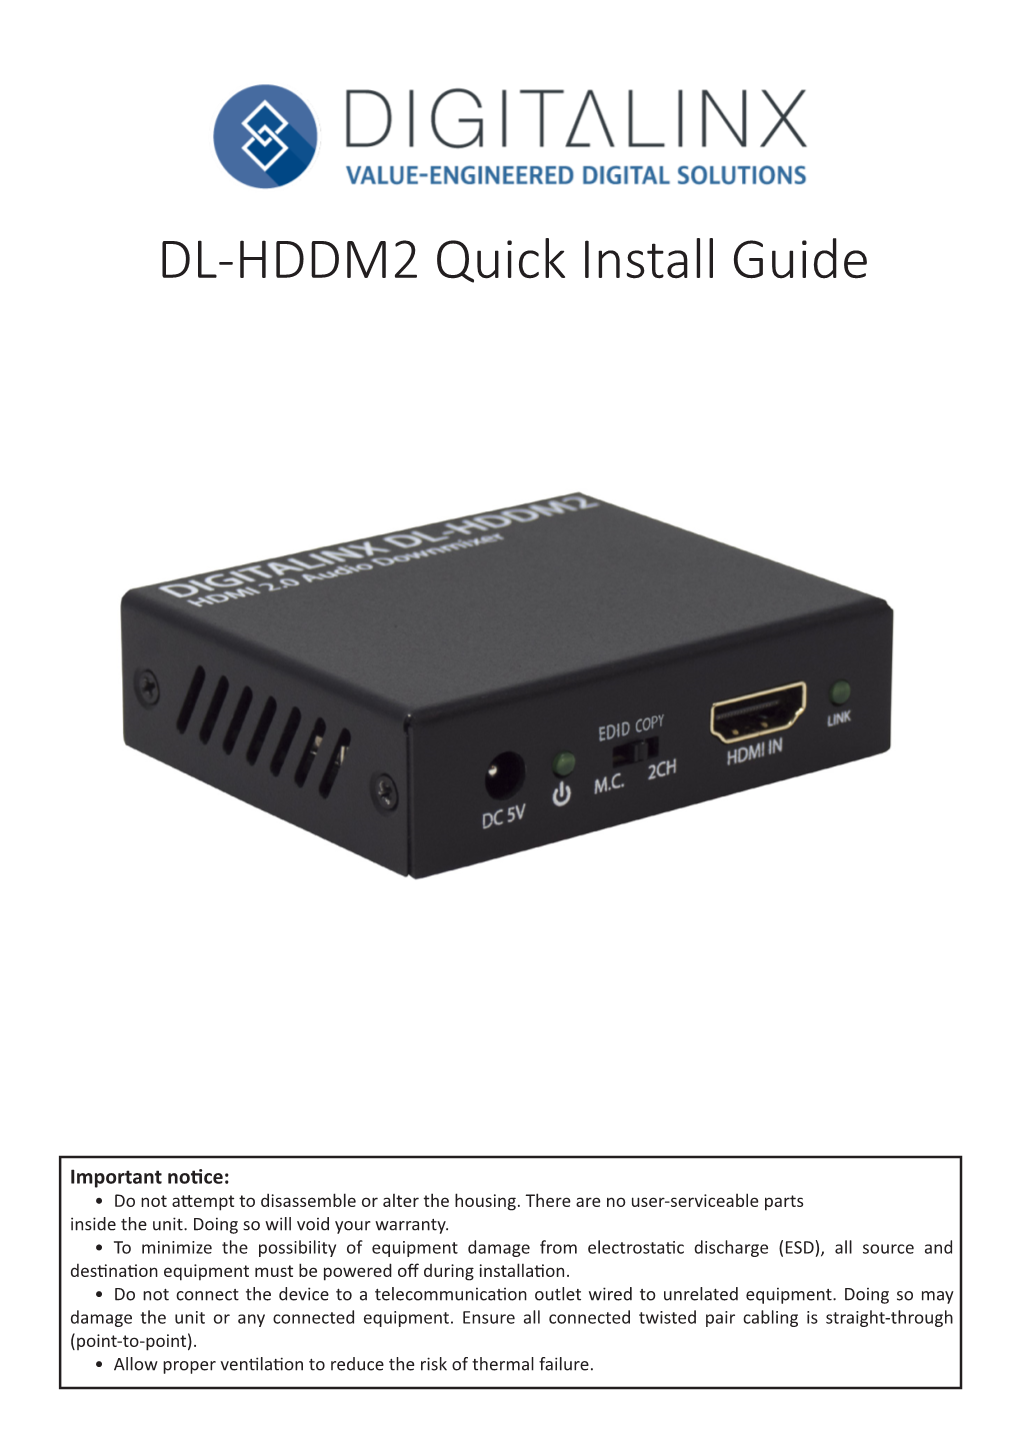 DL-HDDM2 Quick Install Guide